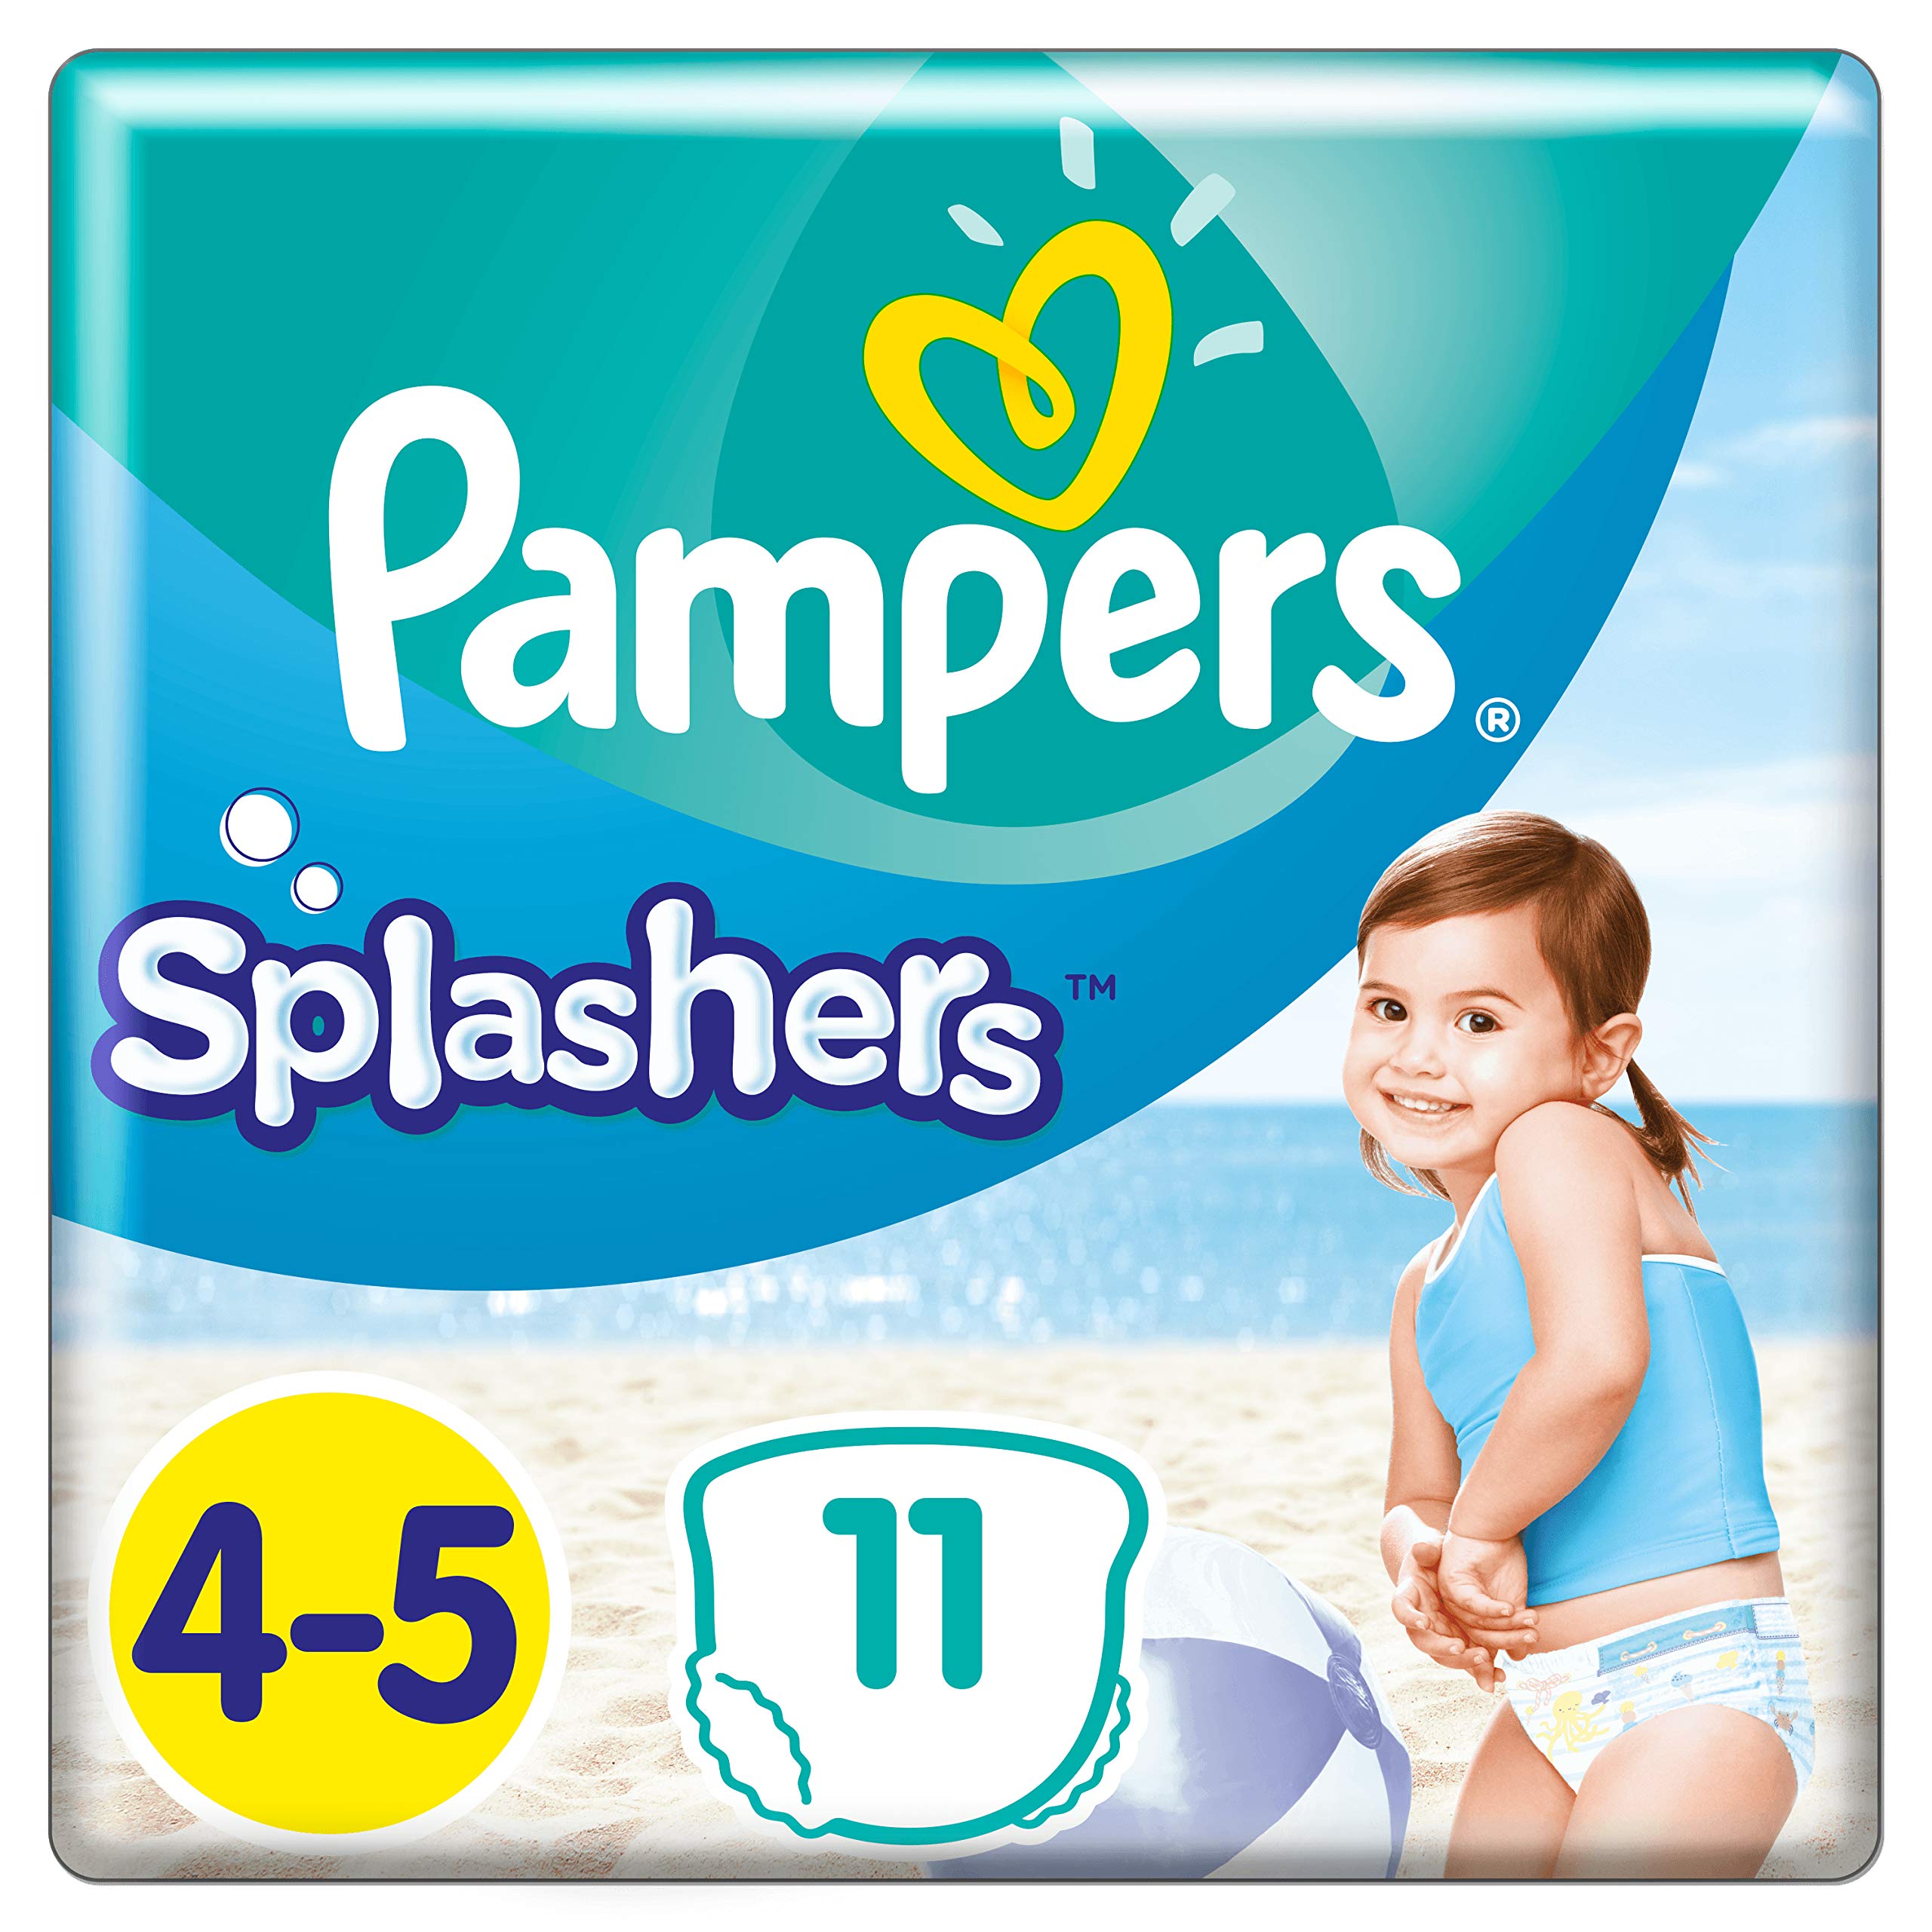 Pampers Splashers Disposable Nappies Size 4-5 (x11 Pants)